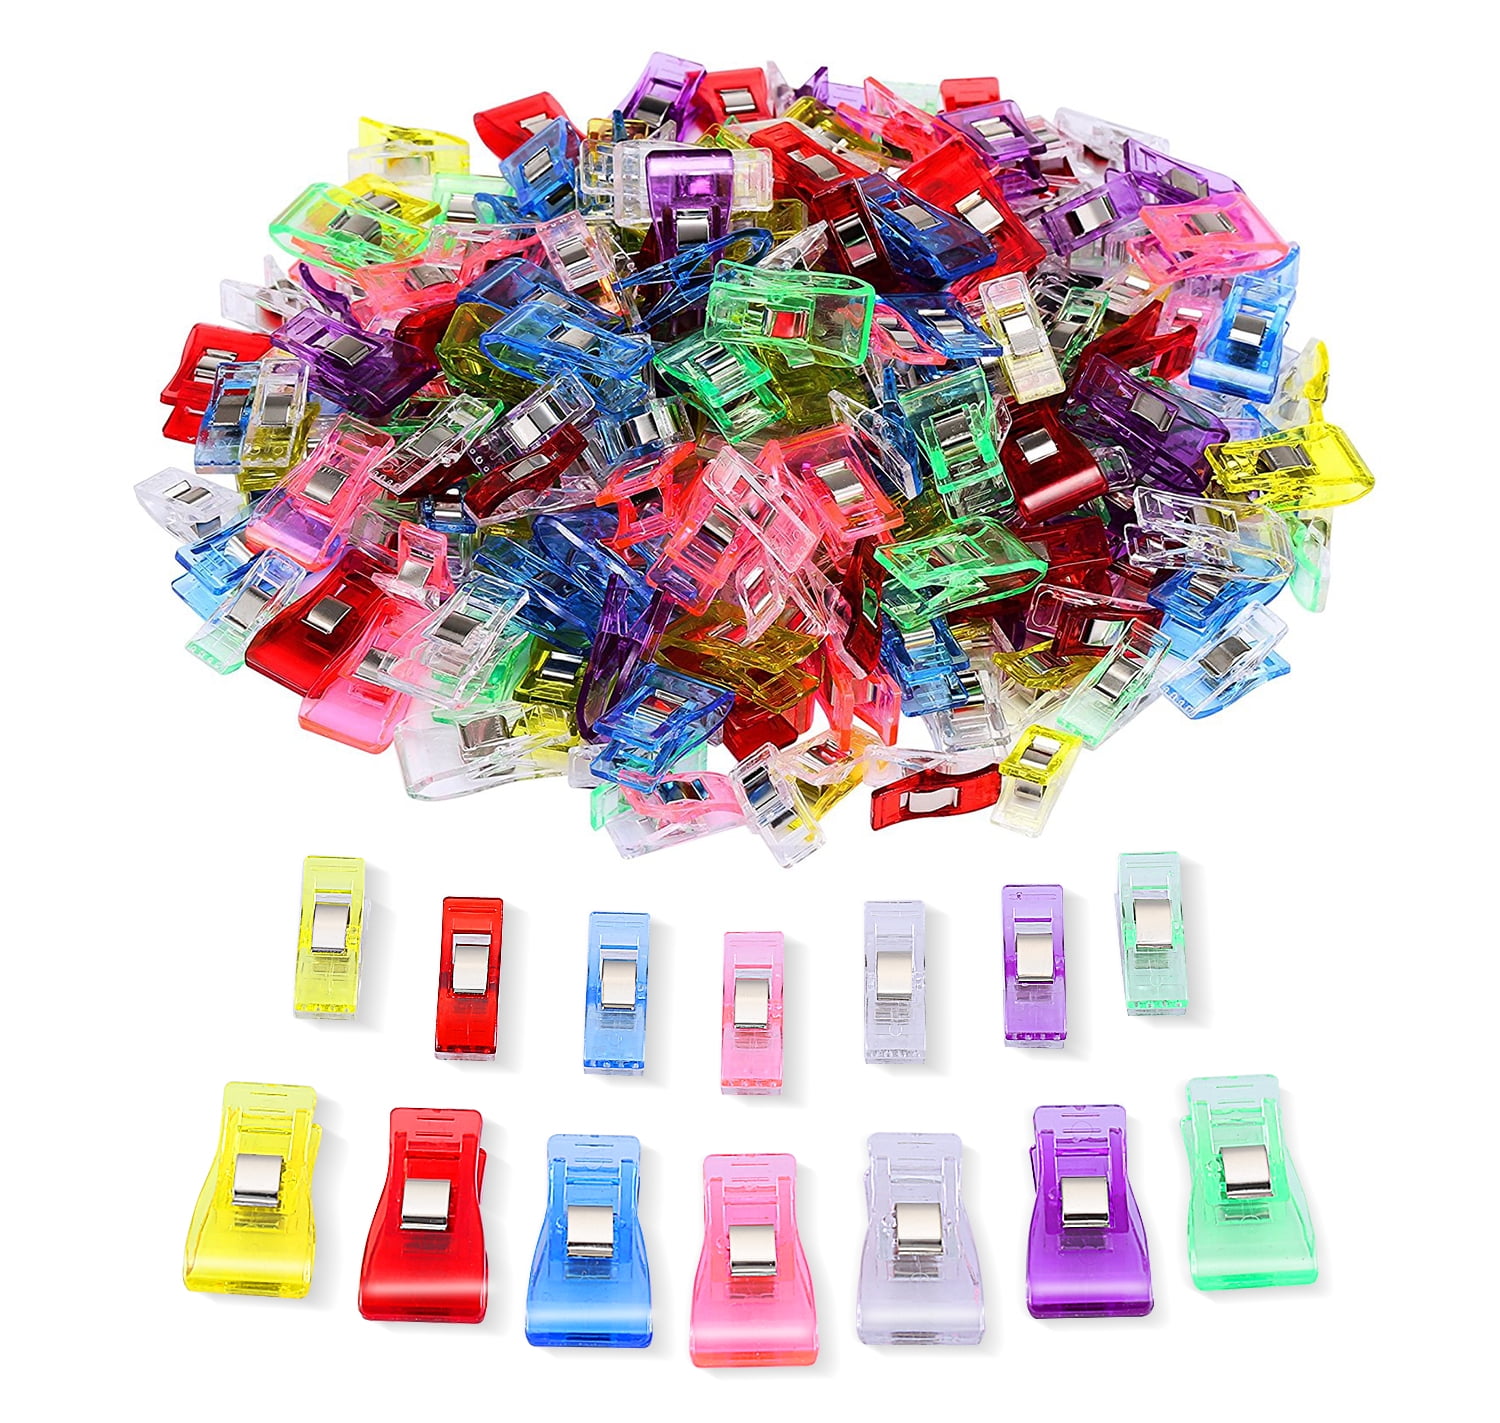 Sewing/Quilting Mcree 20Pcs Plastic Sewing Clips Fabric Mini Clips Craft Quilting Clips for Sewing Quilting Crafting Wonder Craft Clips 